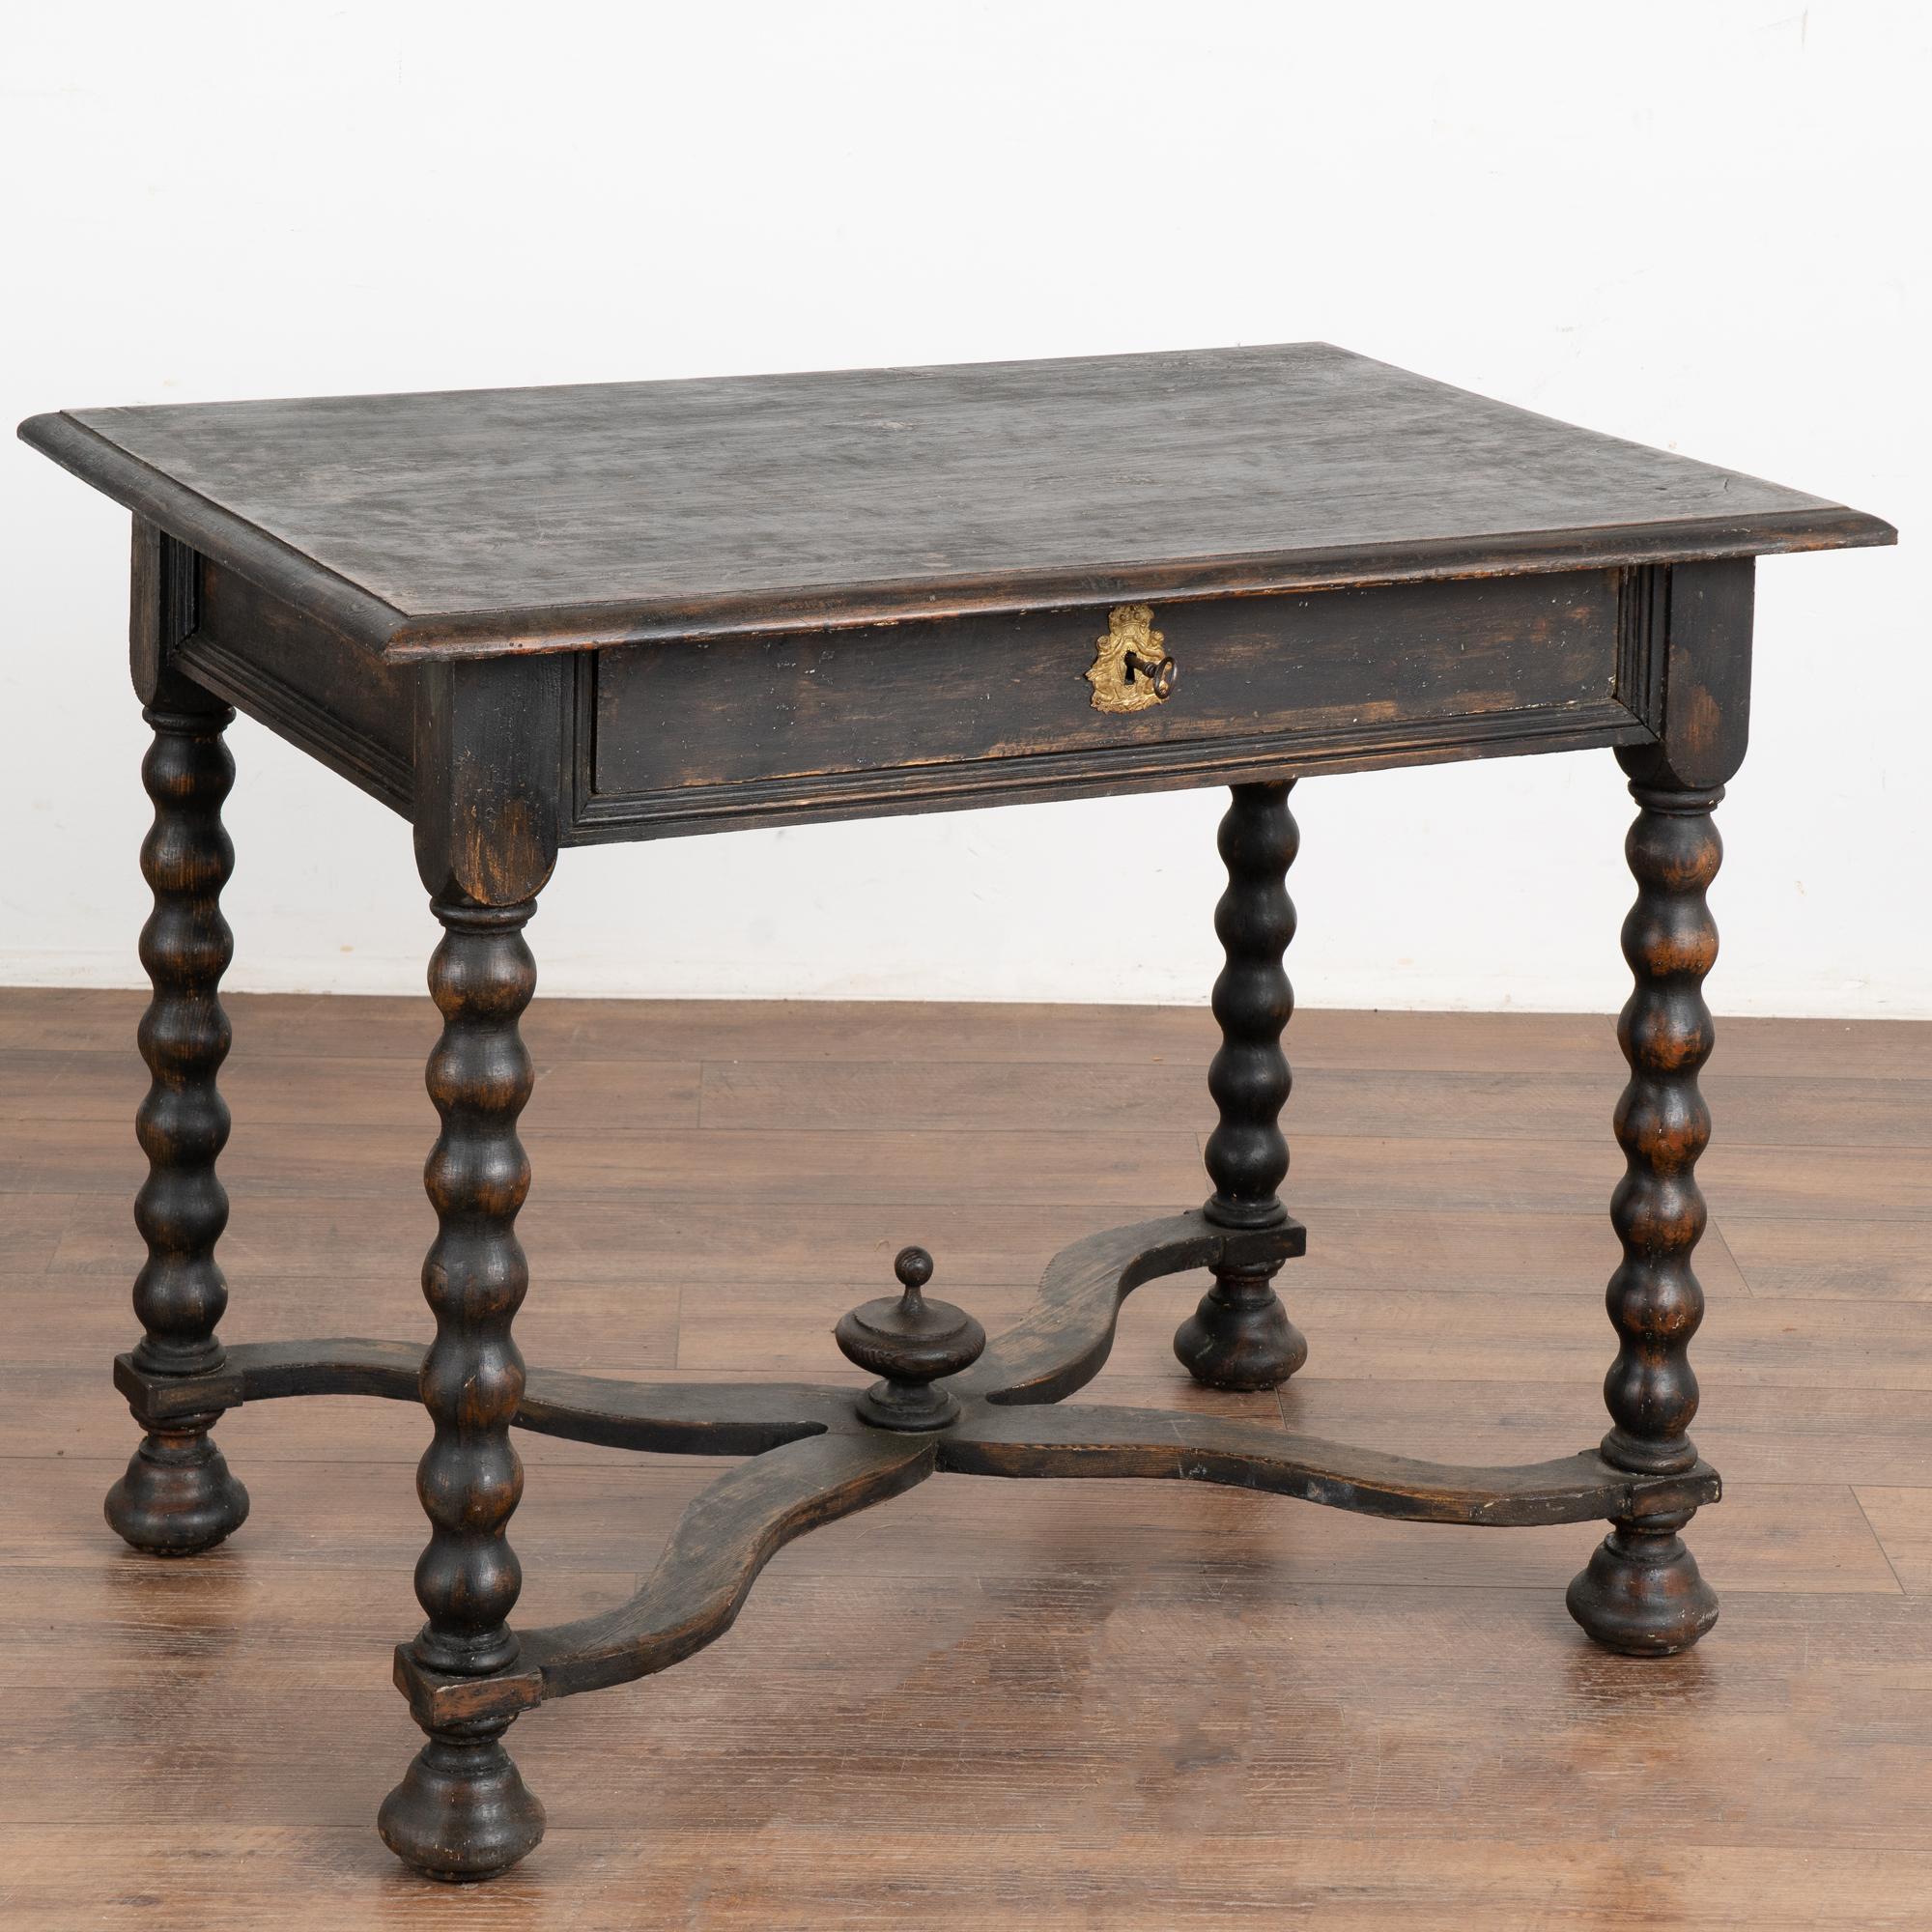 This delightful side table is a wonderful example of Swedish country craftsmanship of the early 1800's. The turned legs with X stretcher base resting on bun feet are traditional style elements while a single drawer with key (lock functions) adds